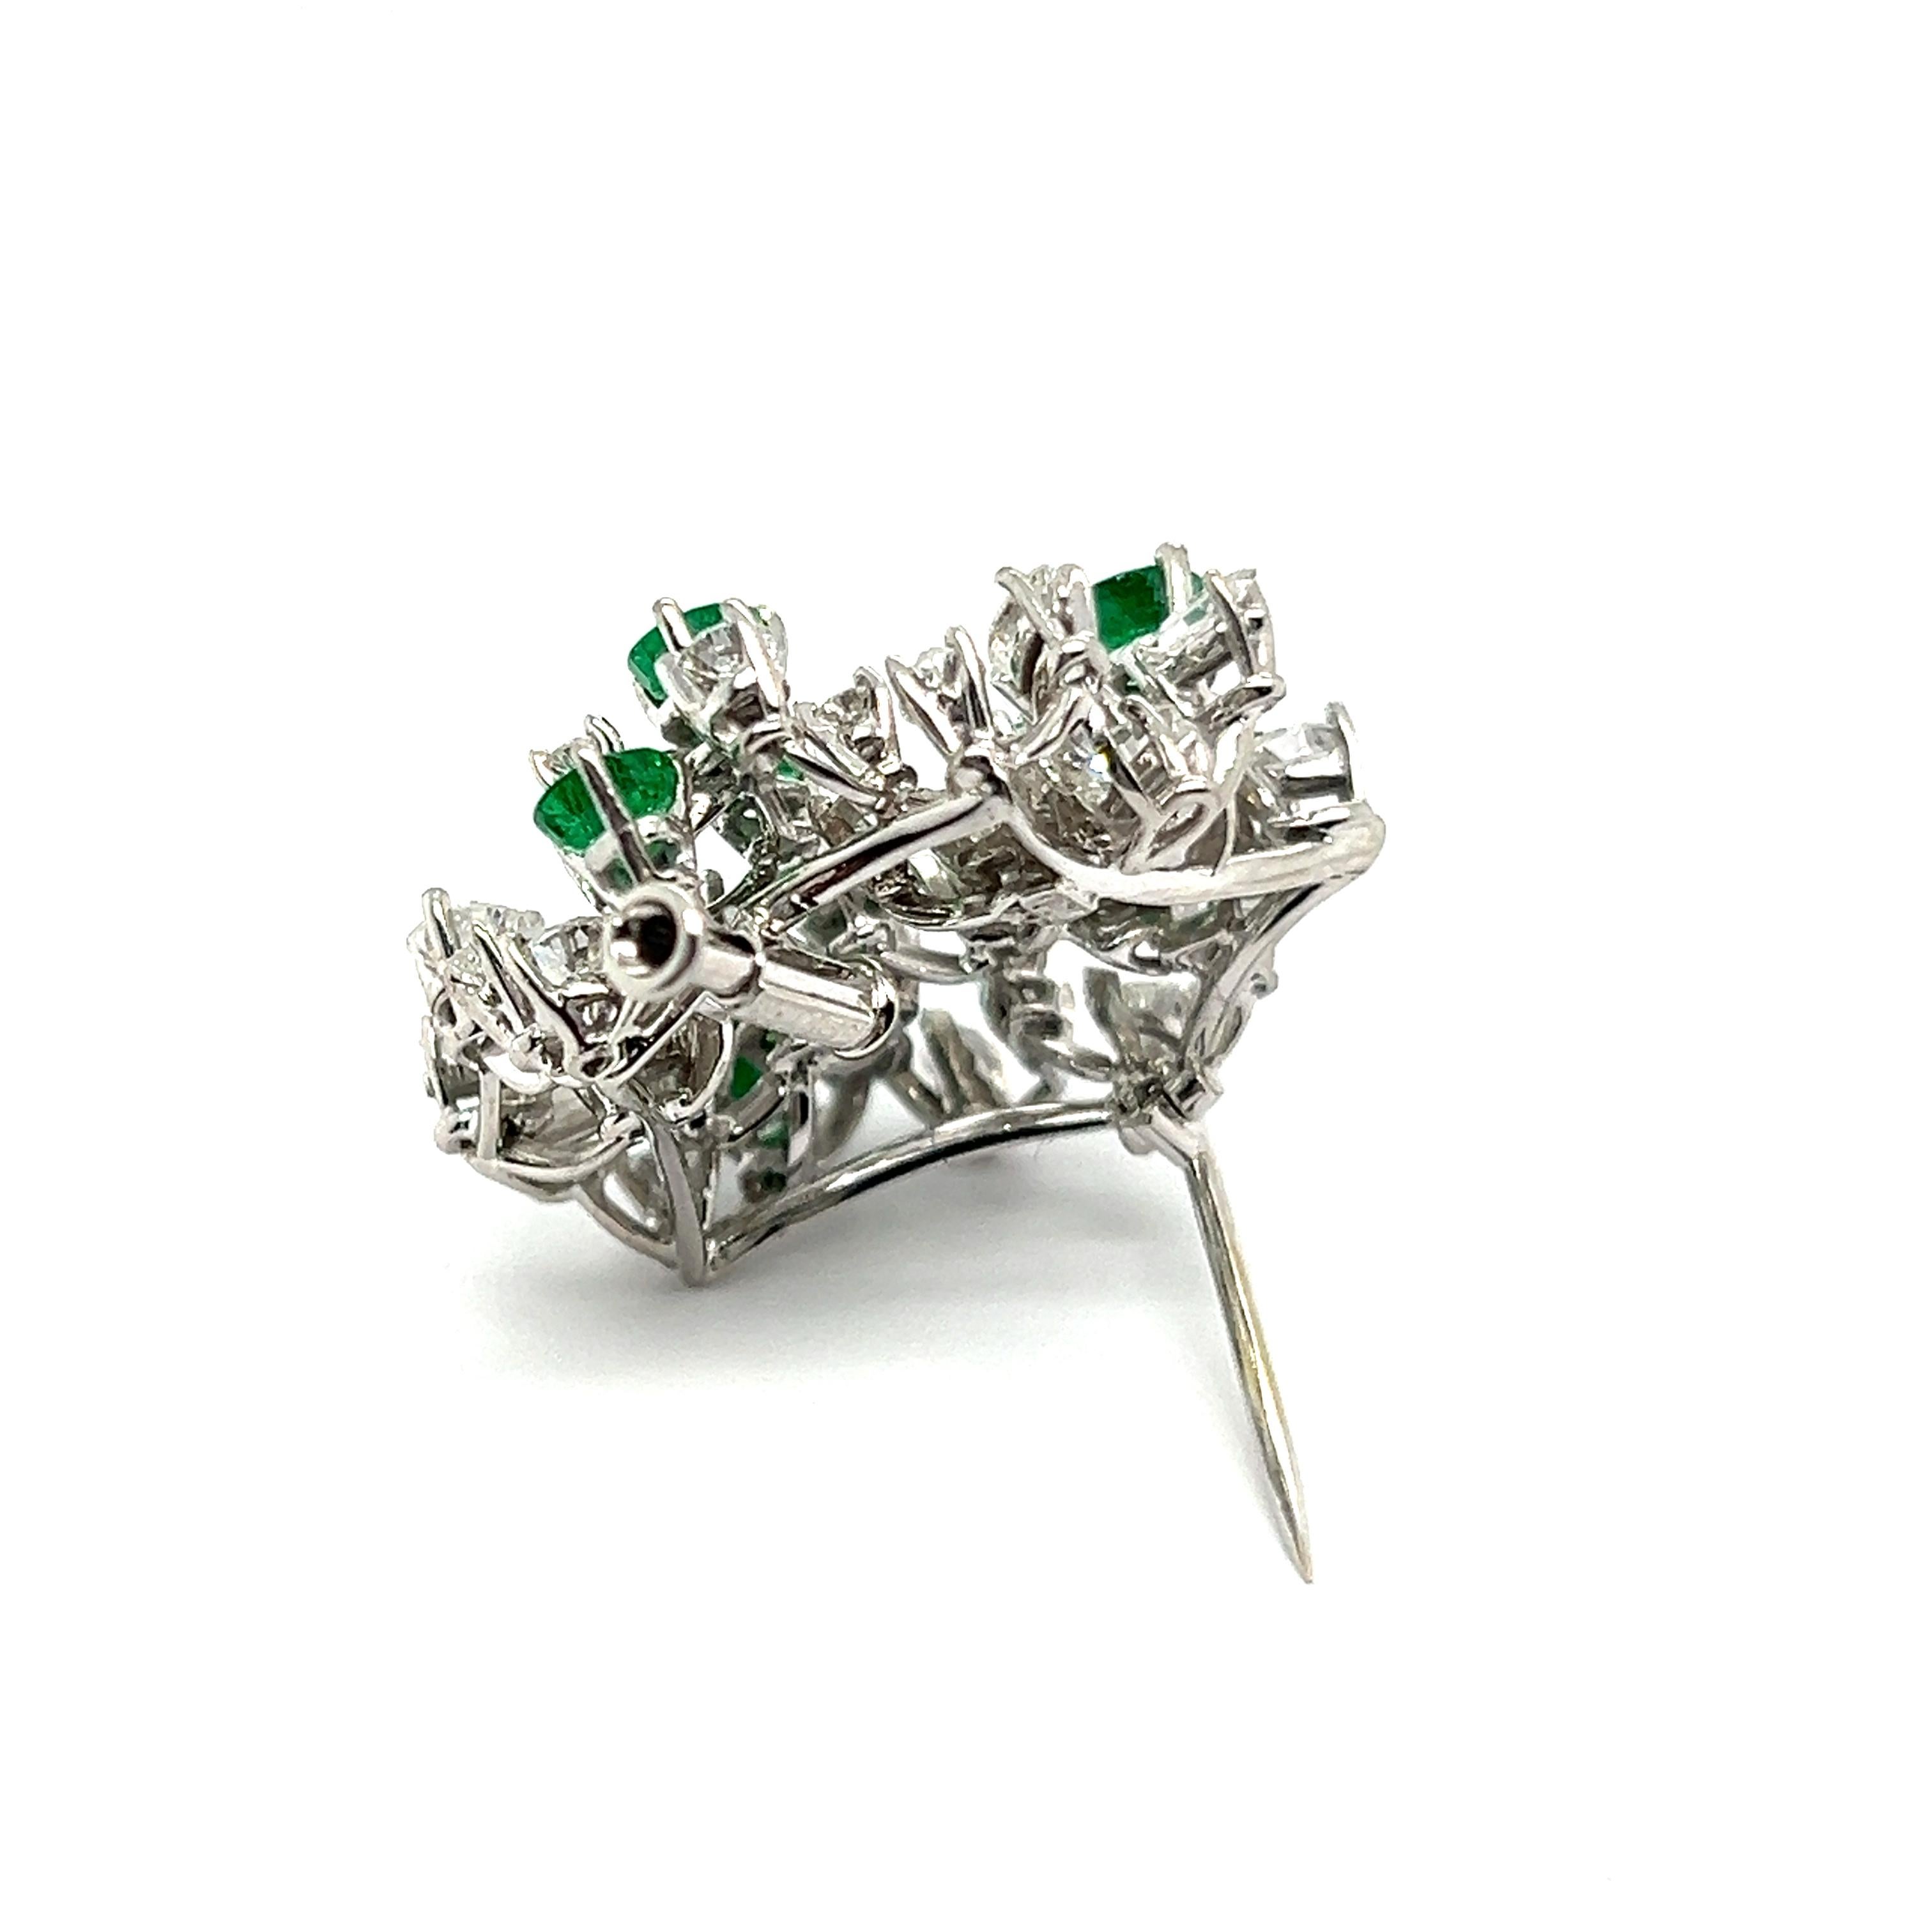 Brooch with Emeralds & Diamonds in 18 Karat White Gold by Meister For Sale 5